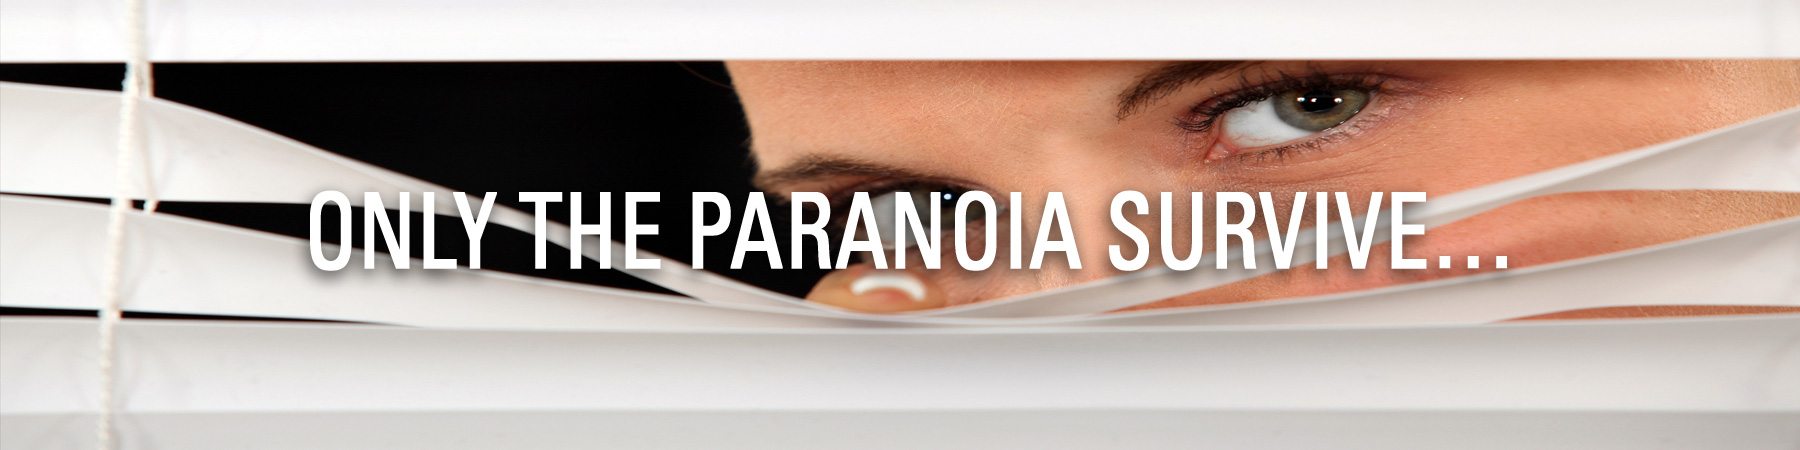 Only the Paranoia Survive…